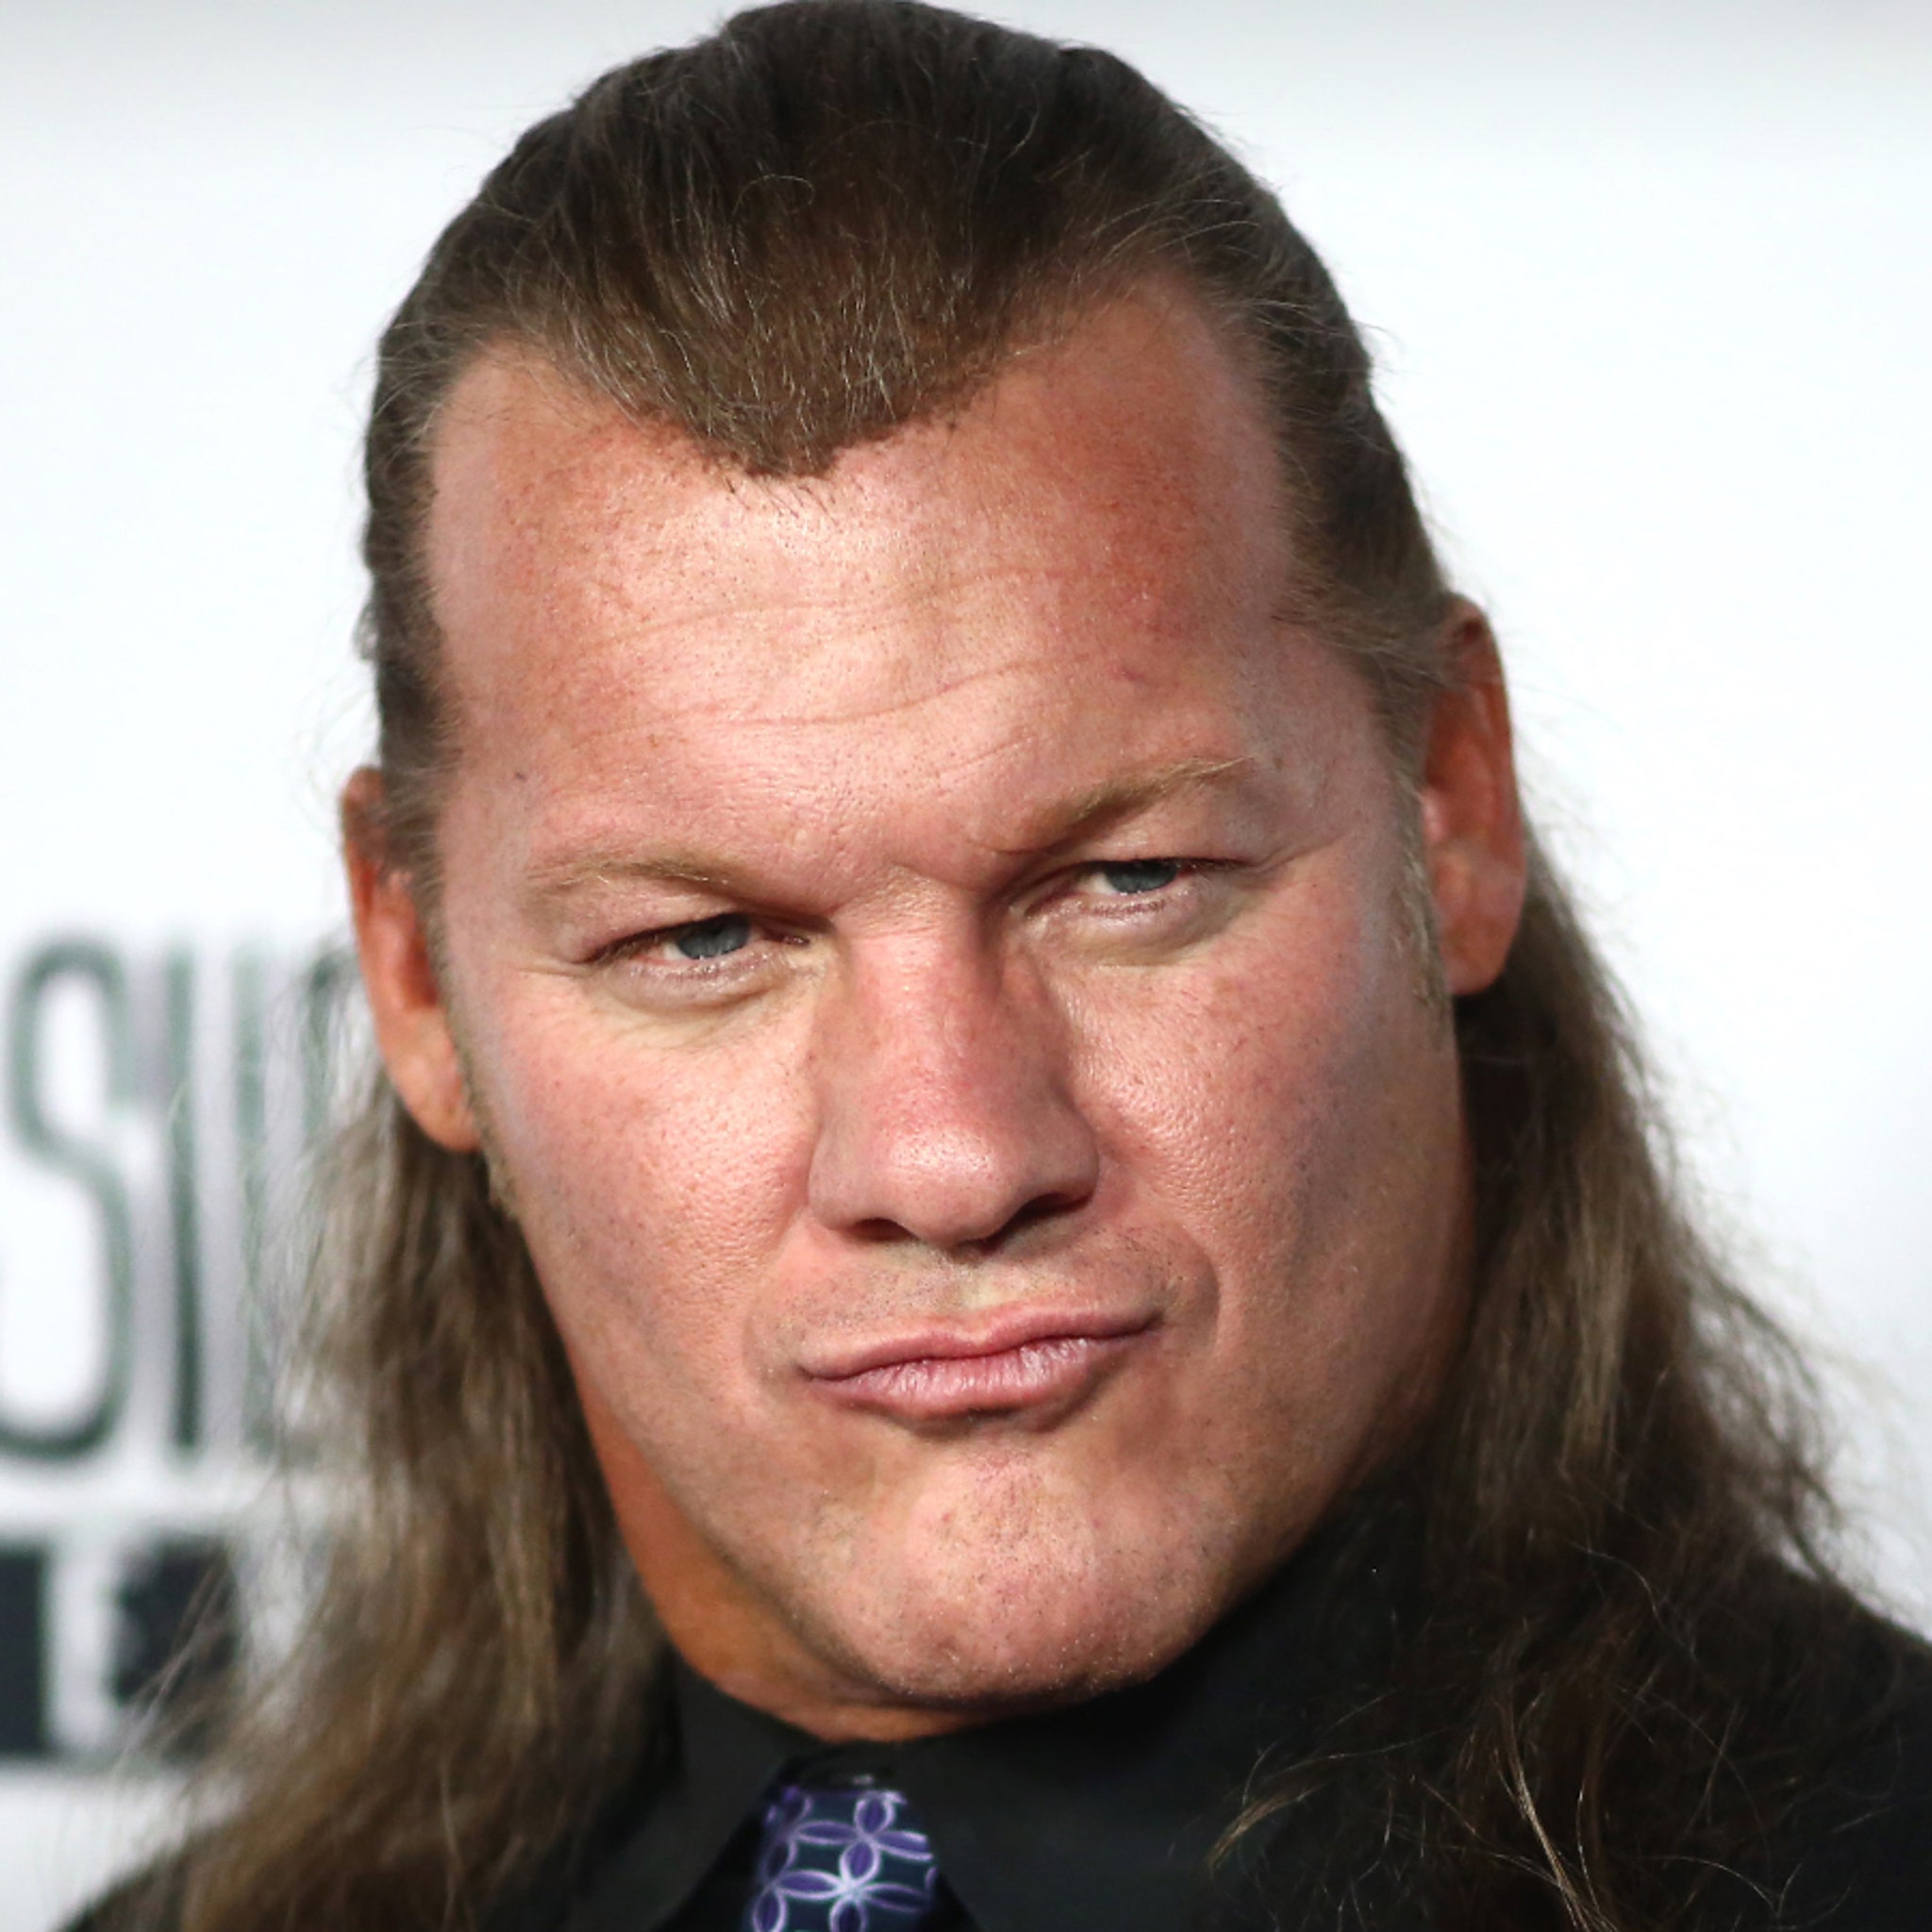 AEW Star Chris Jericho Lands Starring Role In Wrestling-Themed Horror Flick